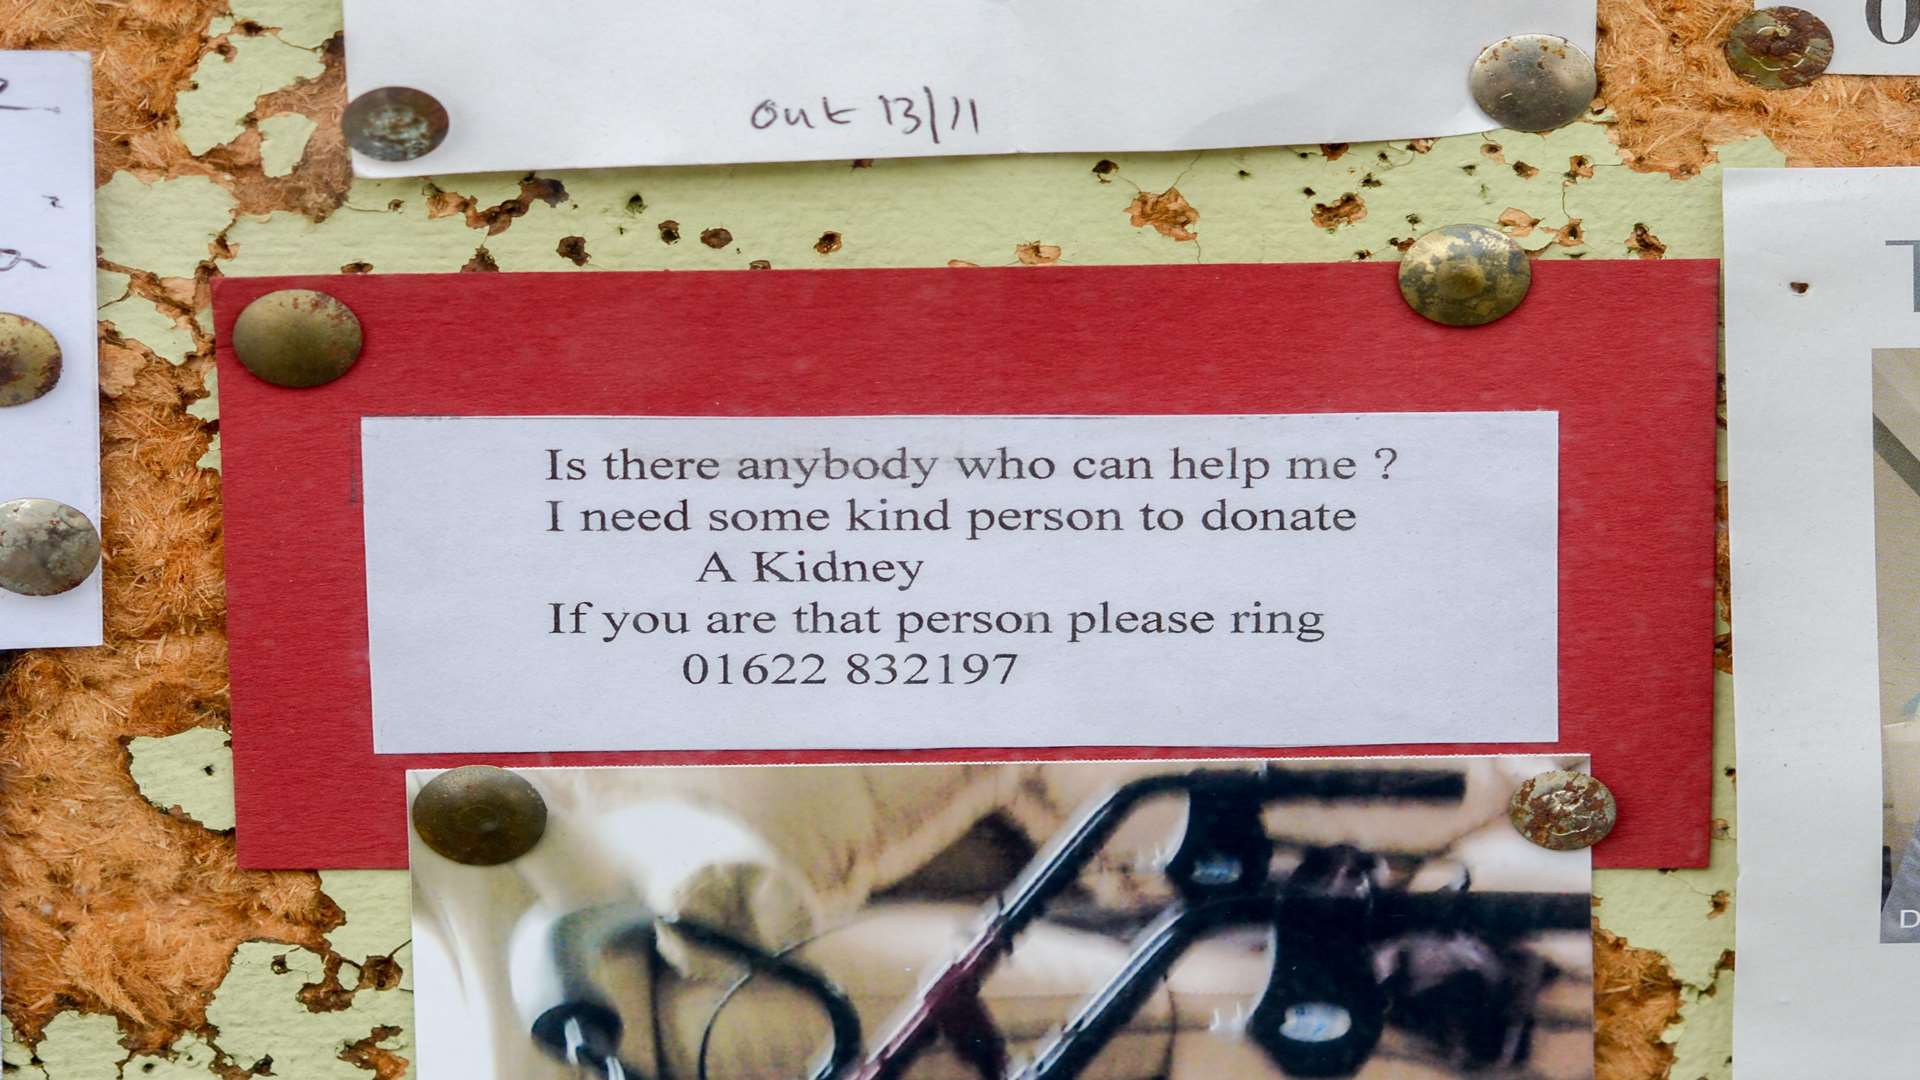 The plea has been placed on a notice board in Marden. Picture: SWNS